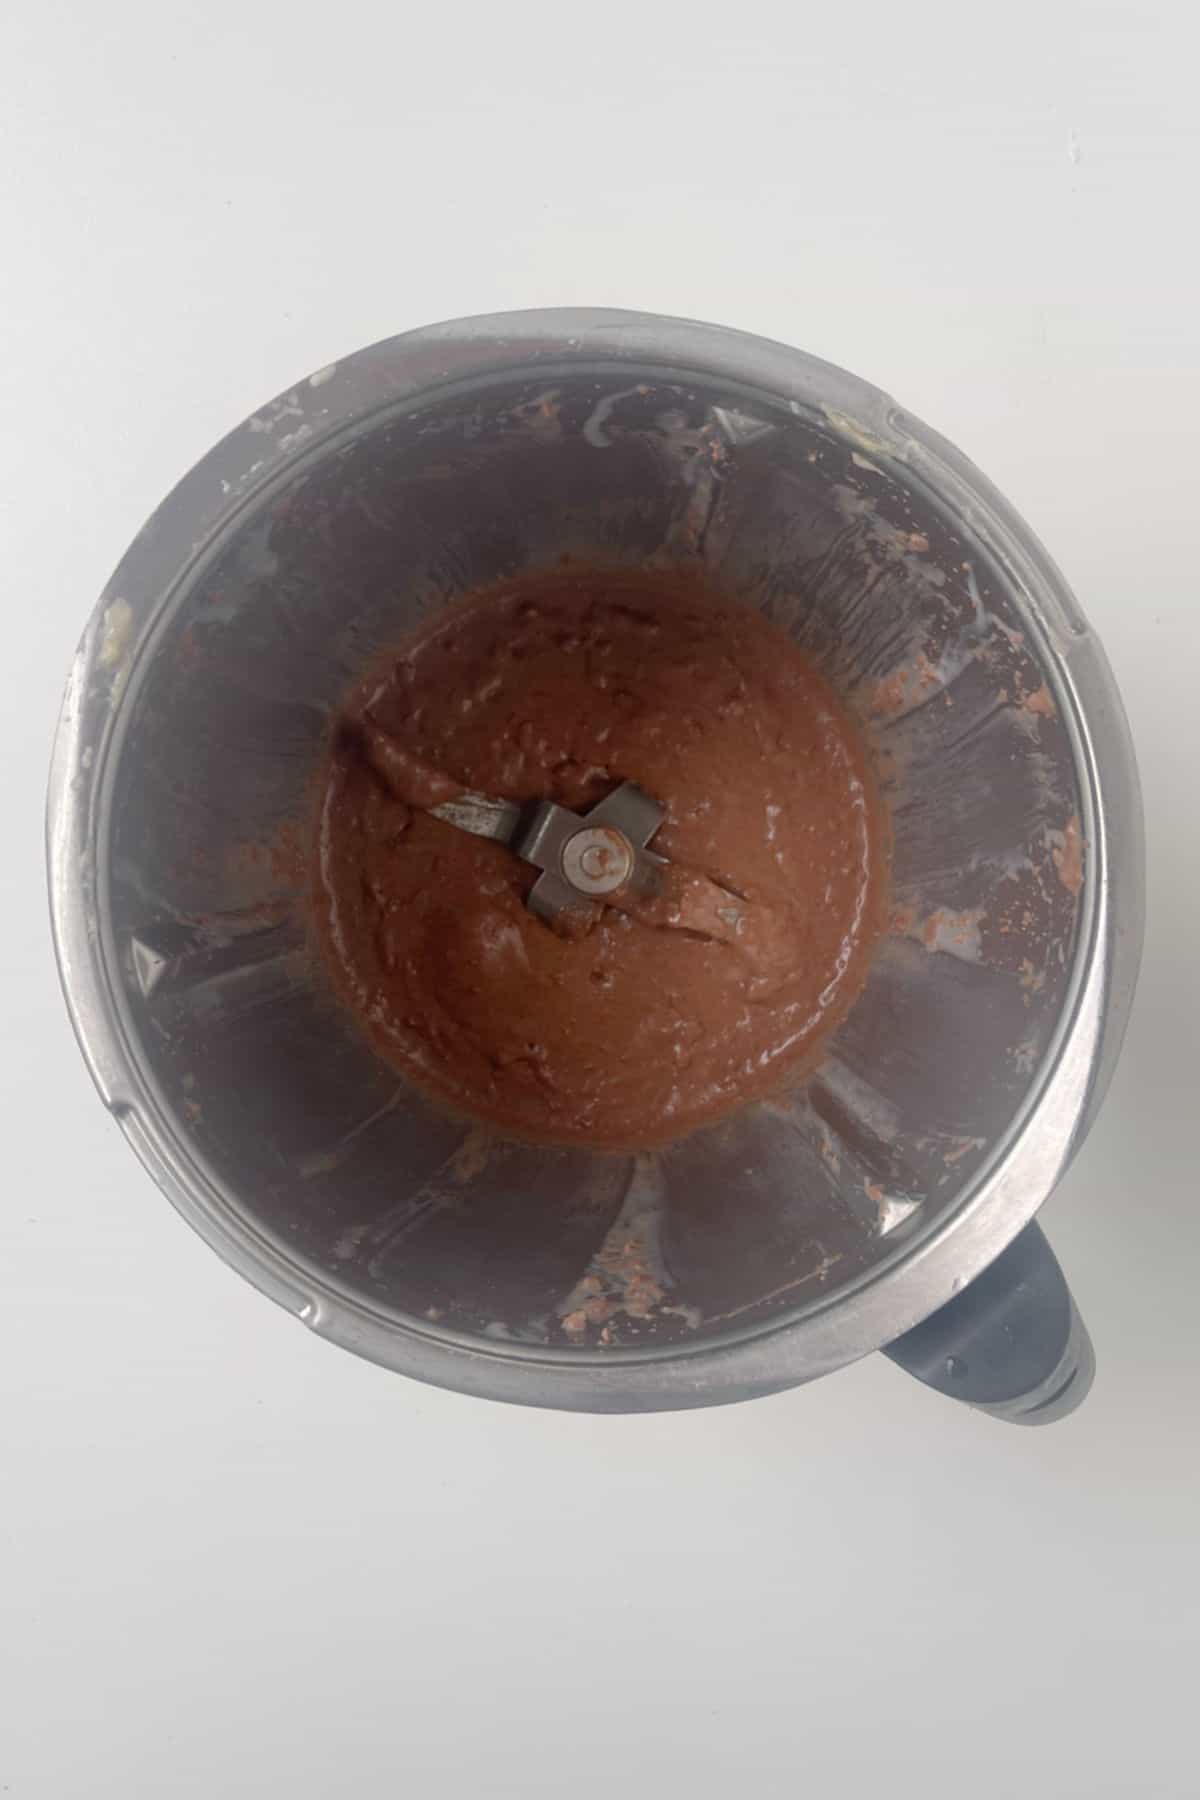 Tim Tam Ball mixture in Thermomix bowl.